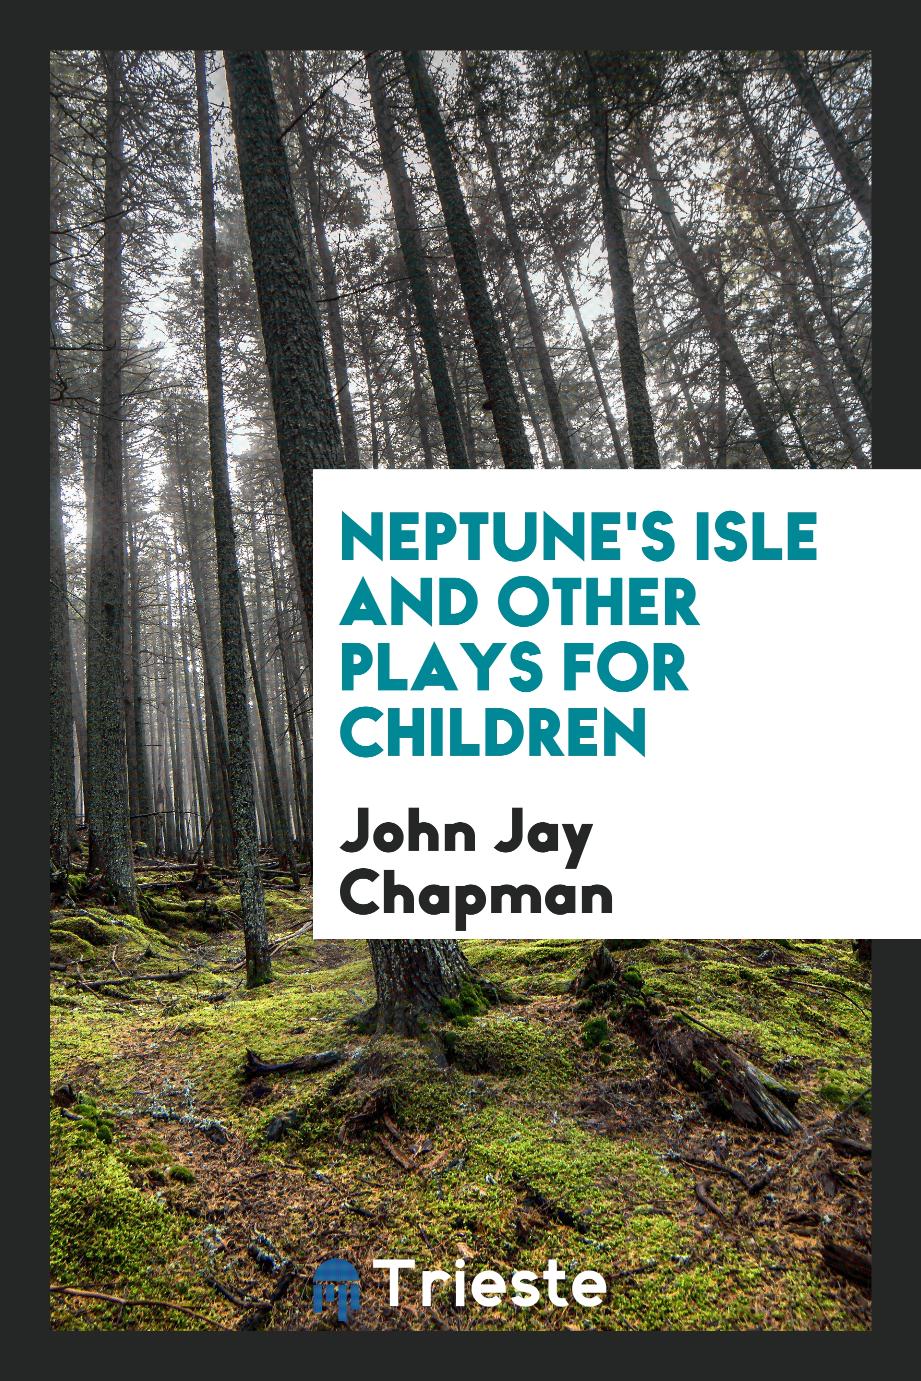 Neptune's isle and other plays for children